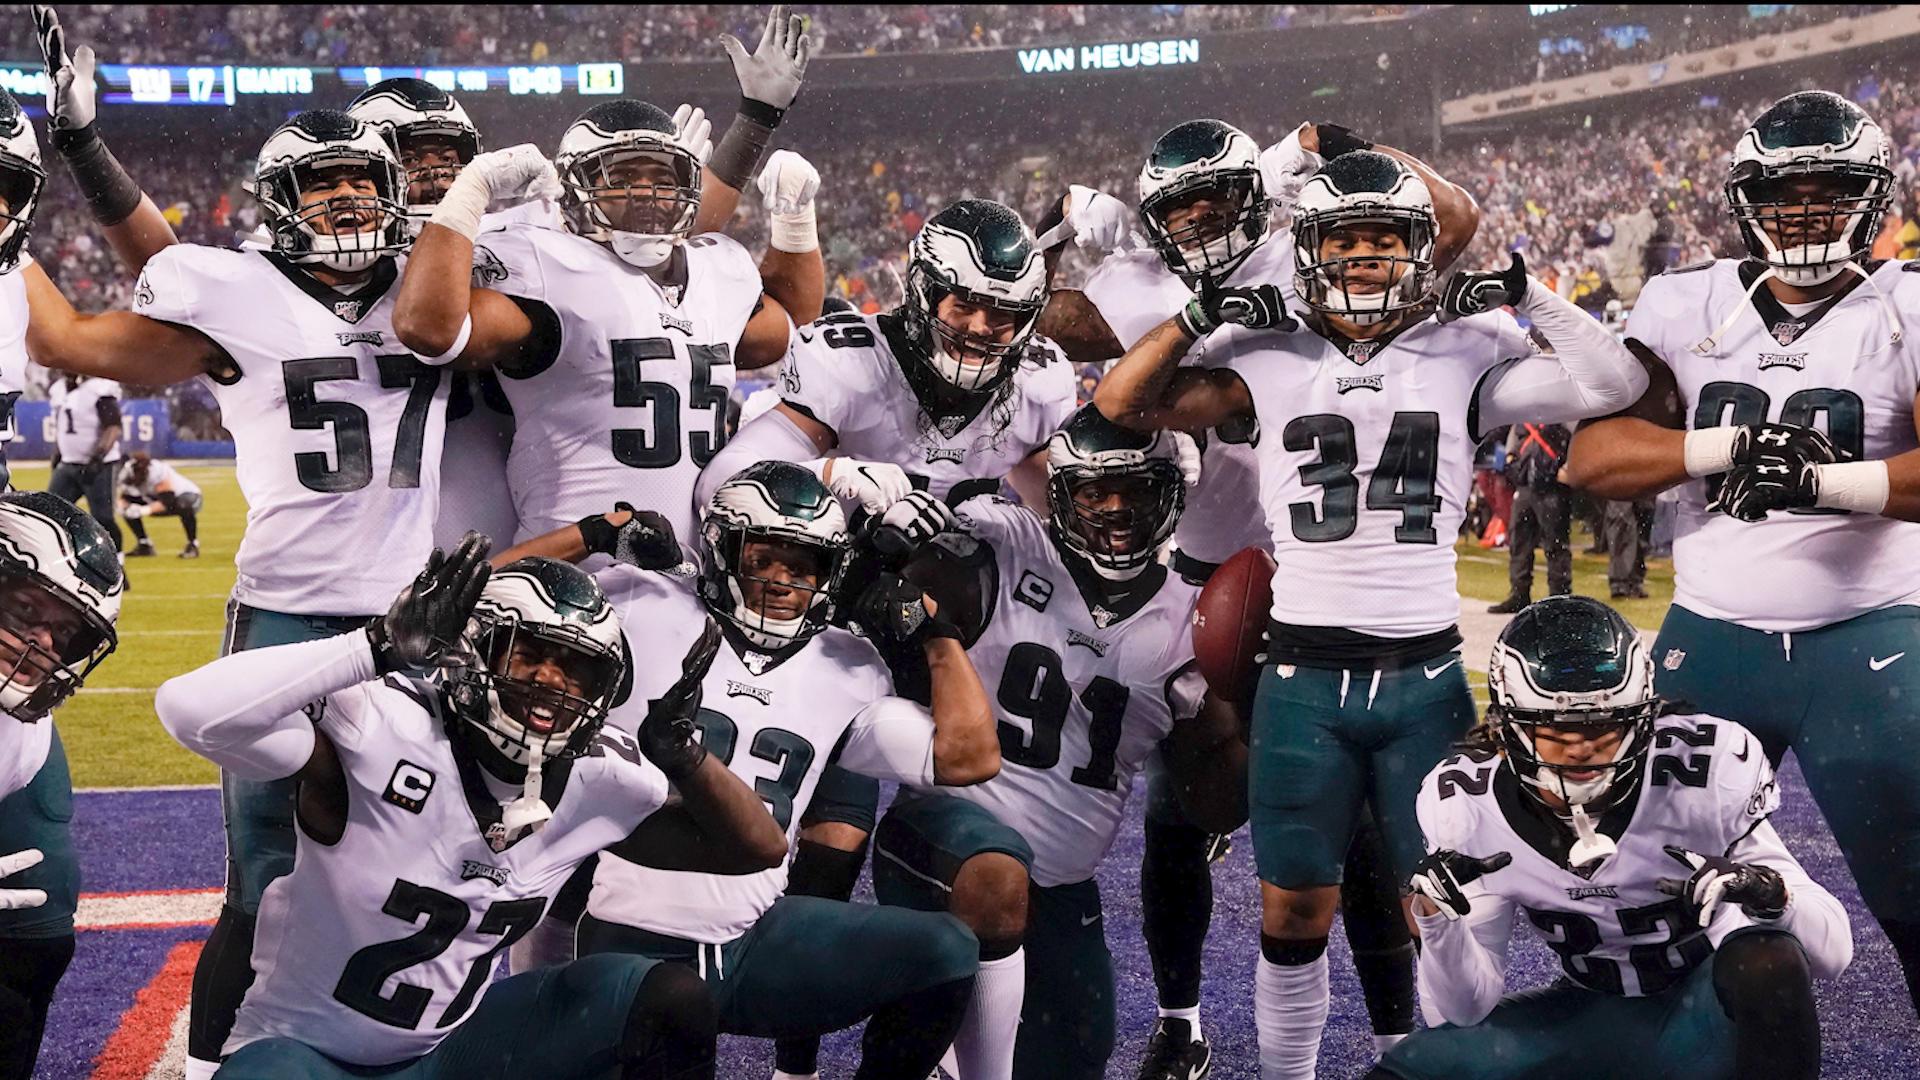 Giants-Eagles Final Score: New York wins crucial game against